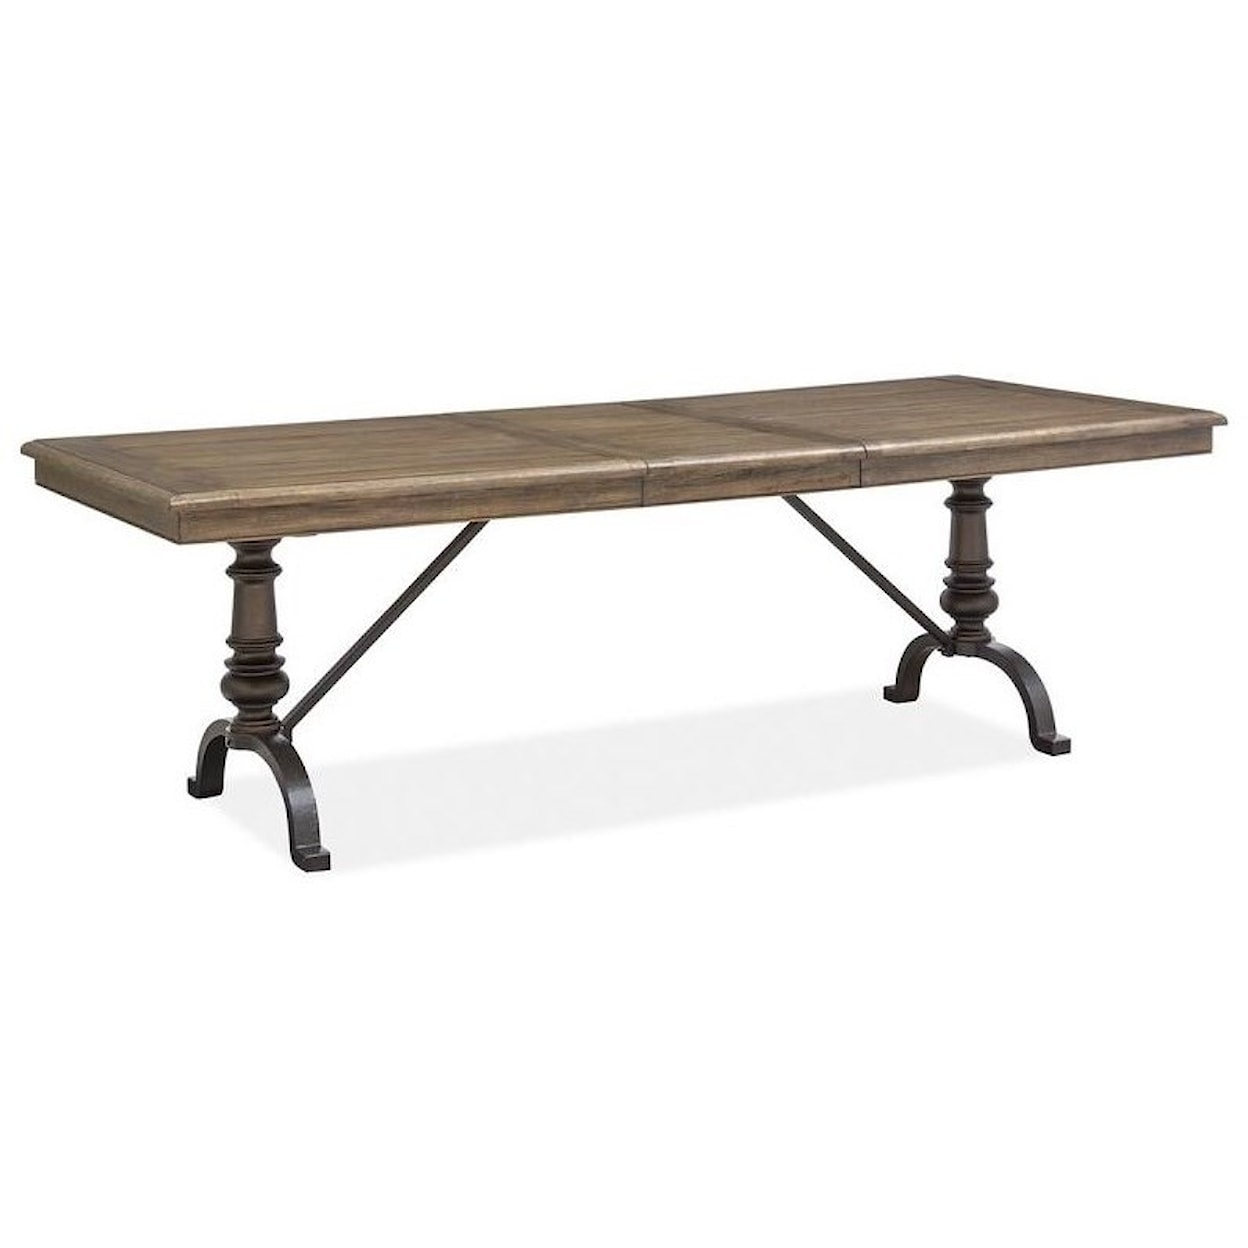 Belfort Select Withers Grove Rectangular Dining Table